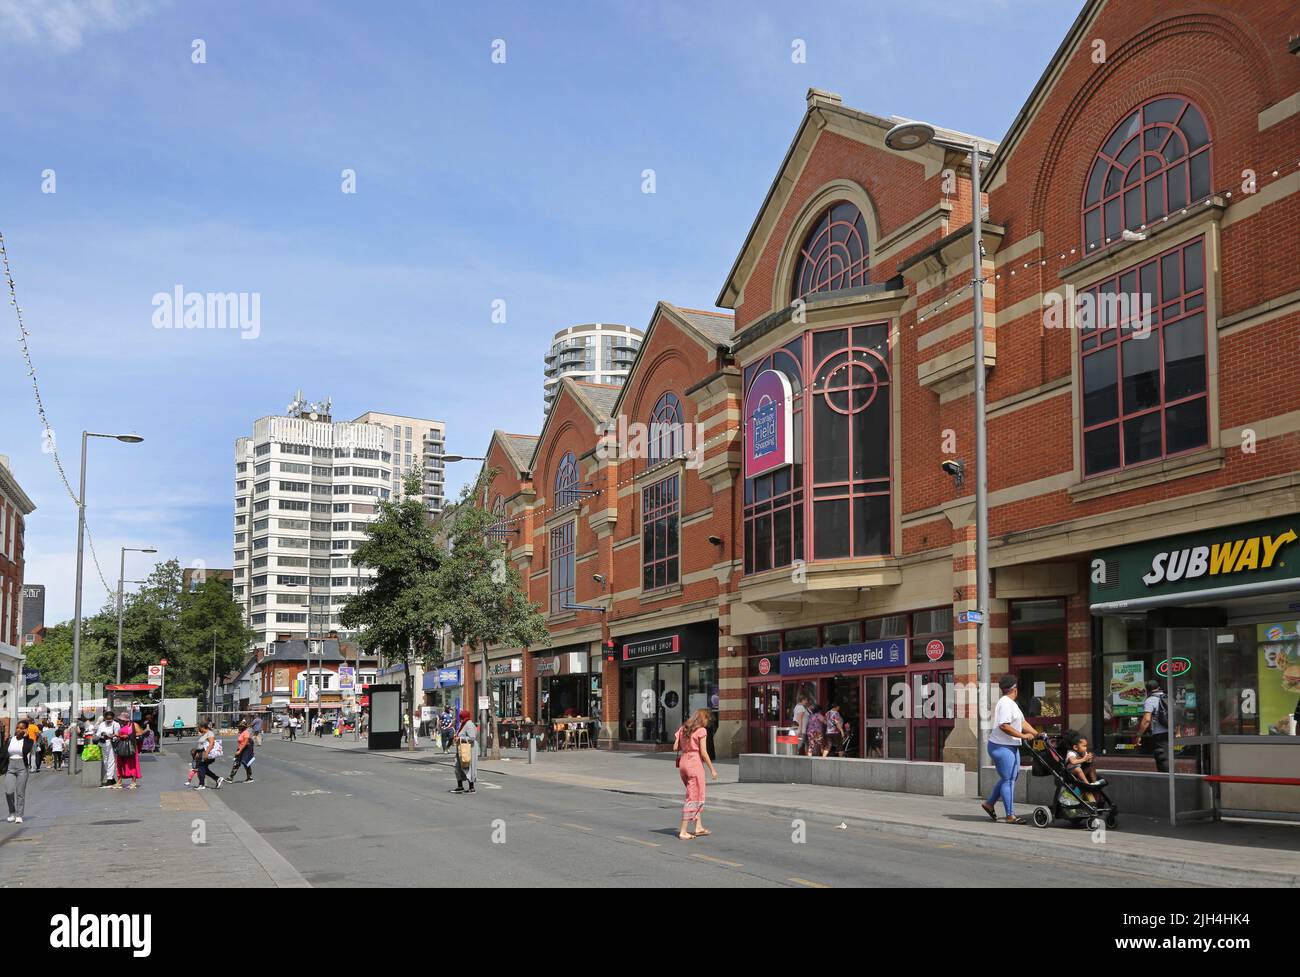 Barking town centre, London, UK. Ripple Road, shows Vicarage Field Shopping Centre (right). Busy, high Street environment. Summer day. Stock Photo